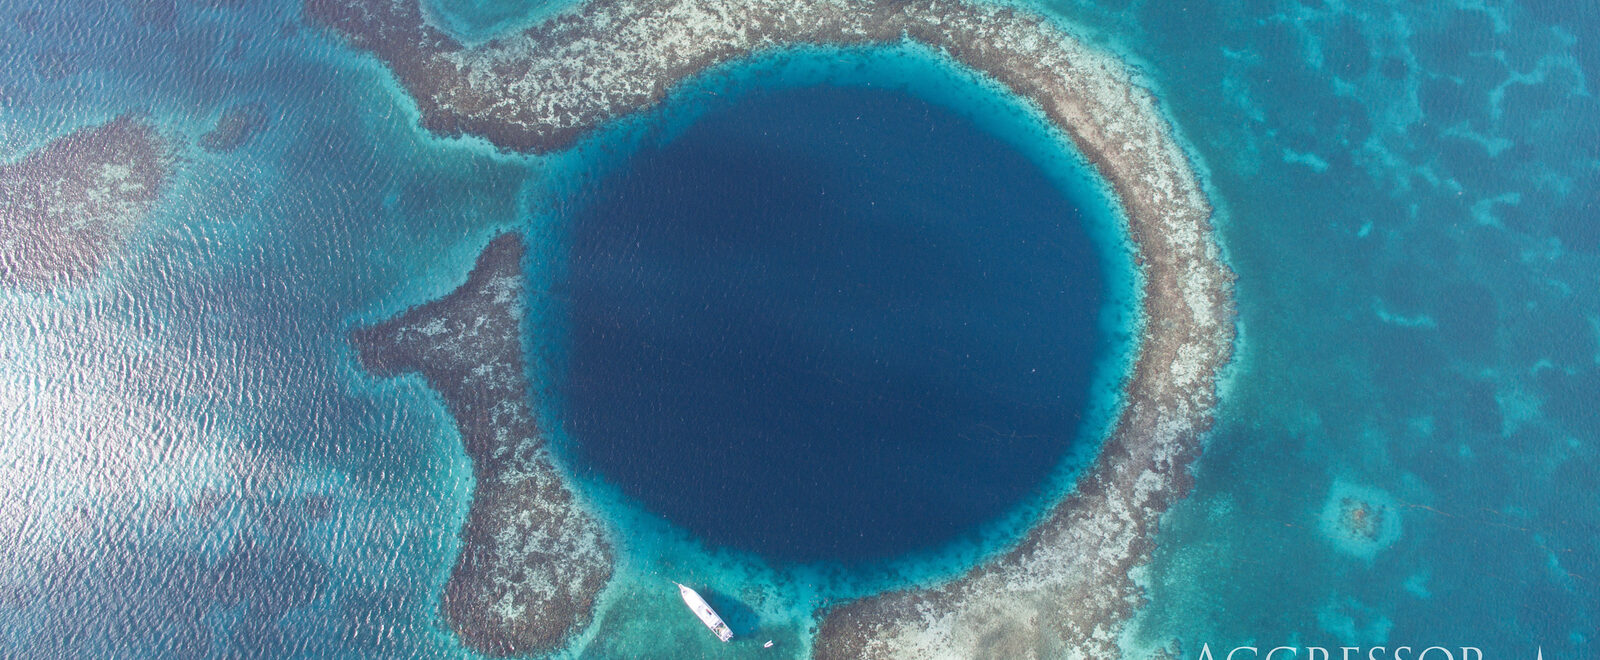 A blue hole is seen below in the ocean. The hole is a much darker color than the rest of the ocean and is perfectly round.